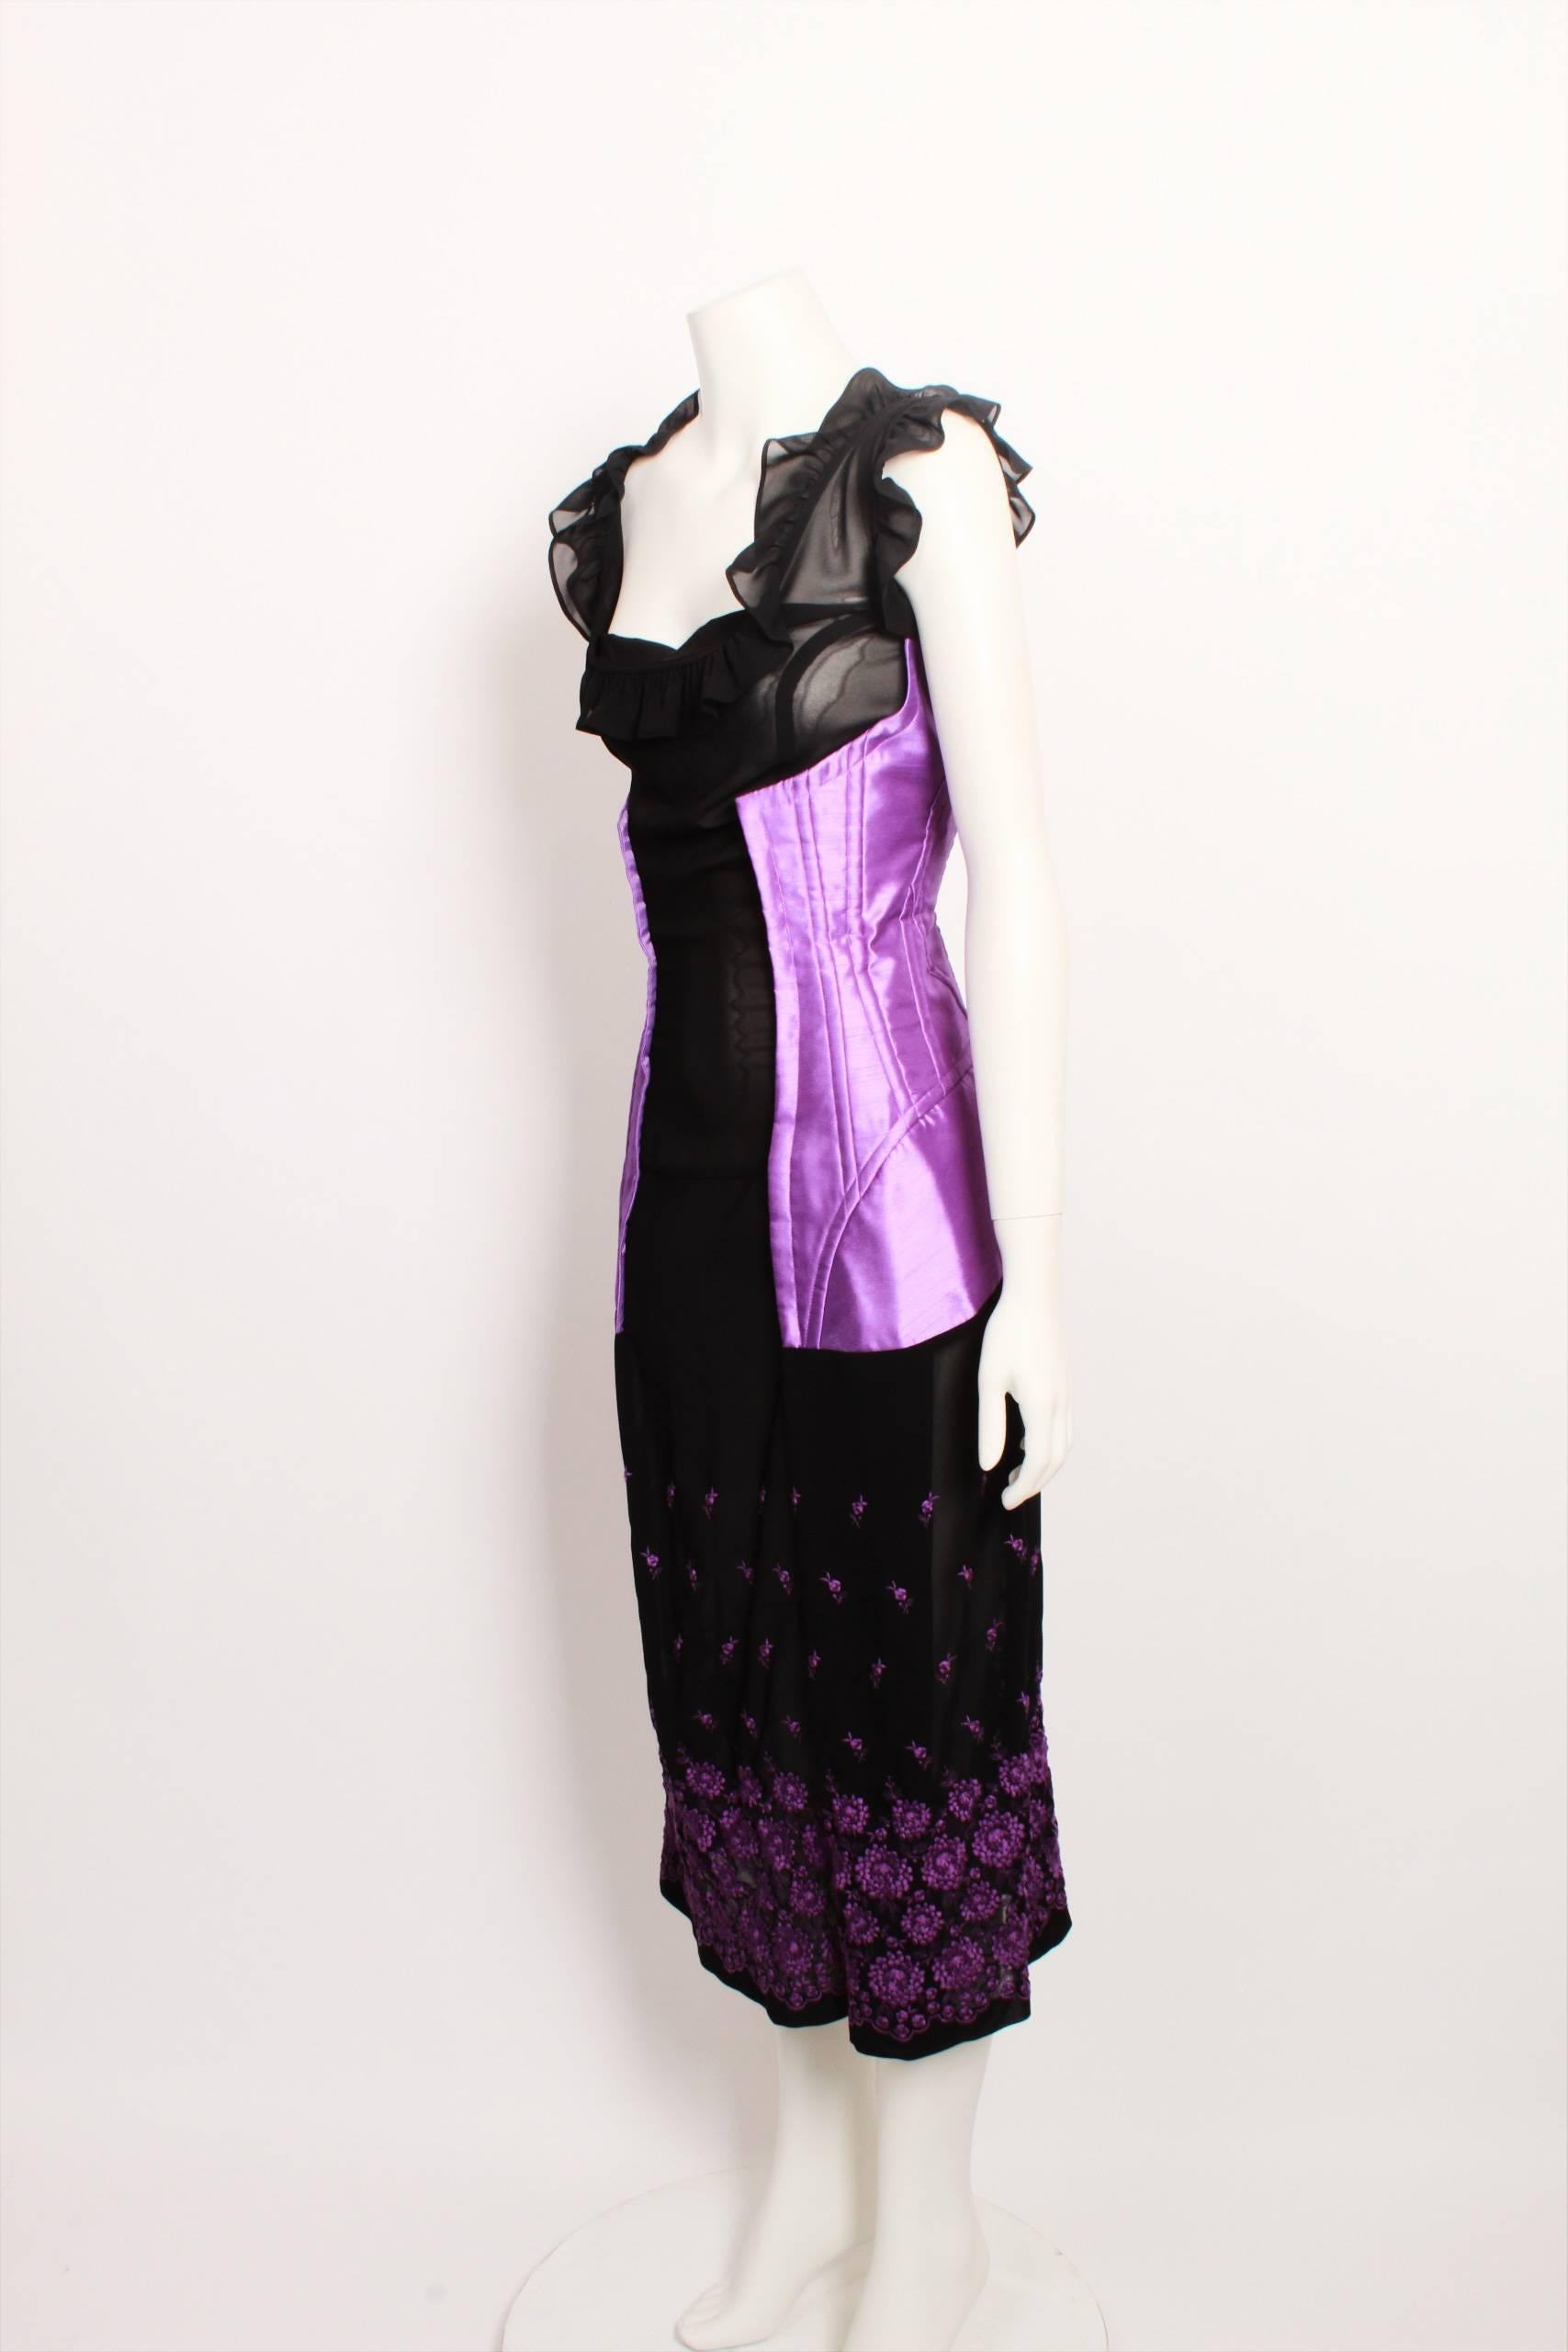 Comme des Garcons  2001 black dress with purple floral embroidered detail.
Made in Japan. Size M. 